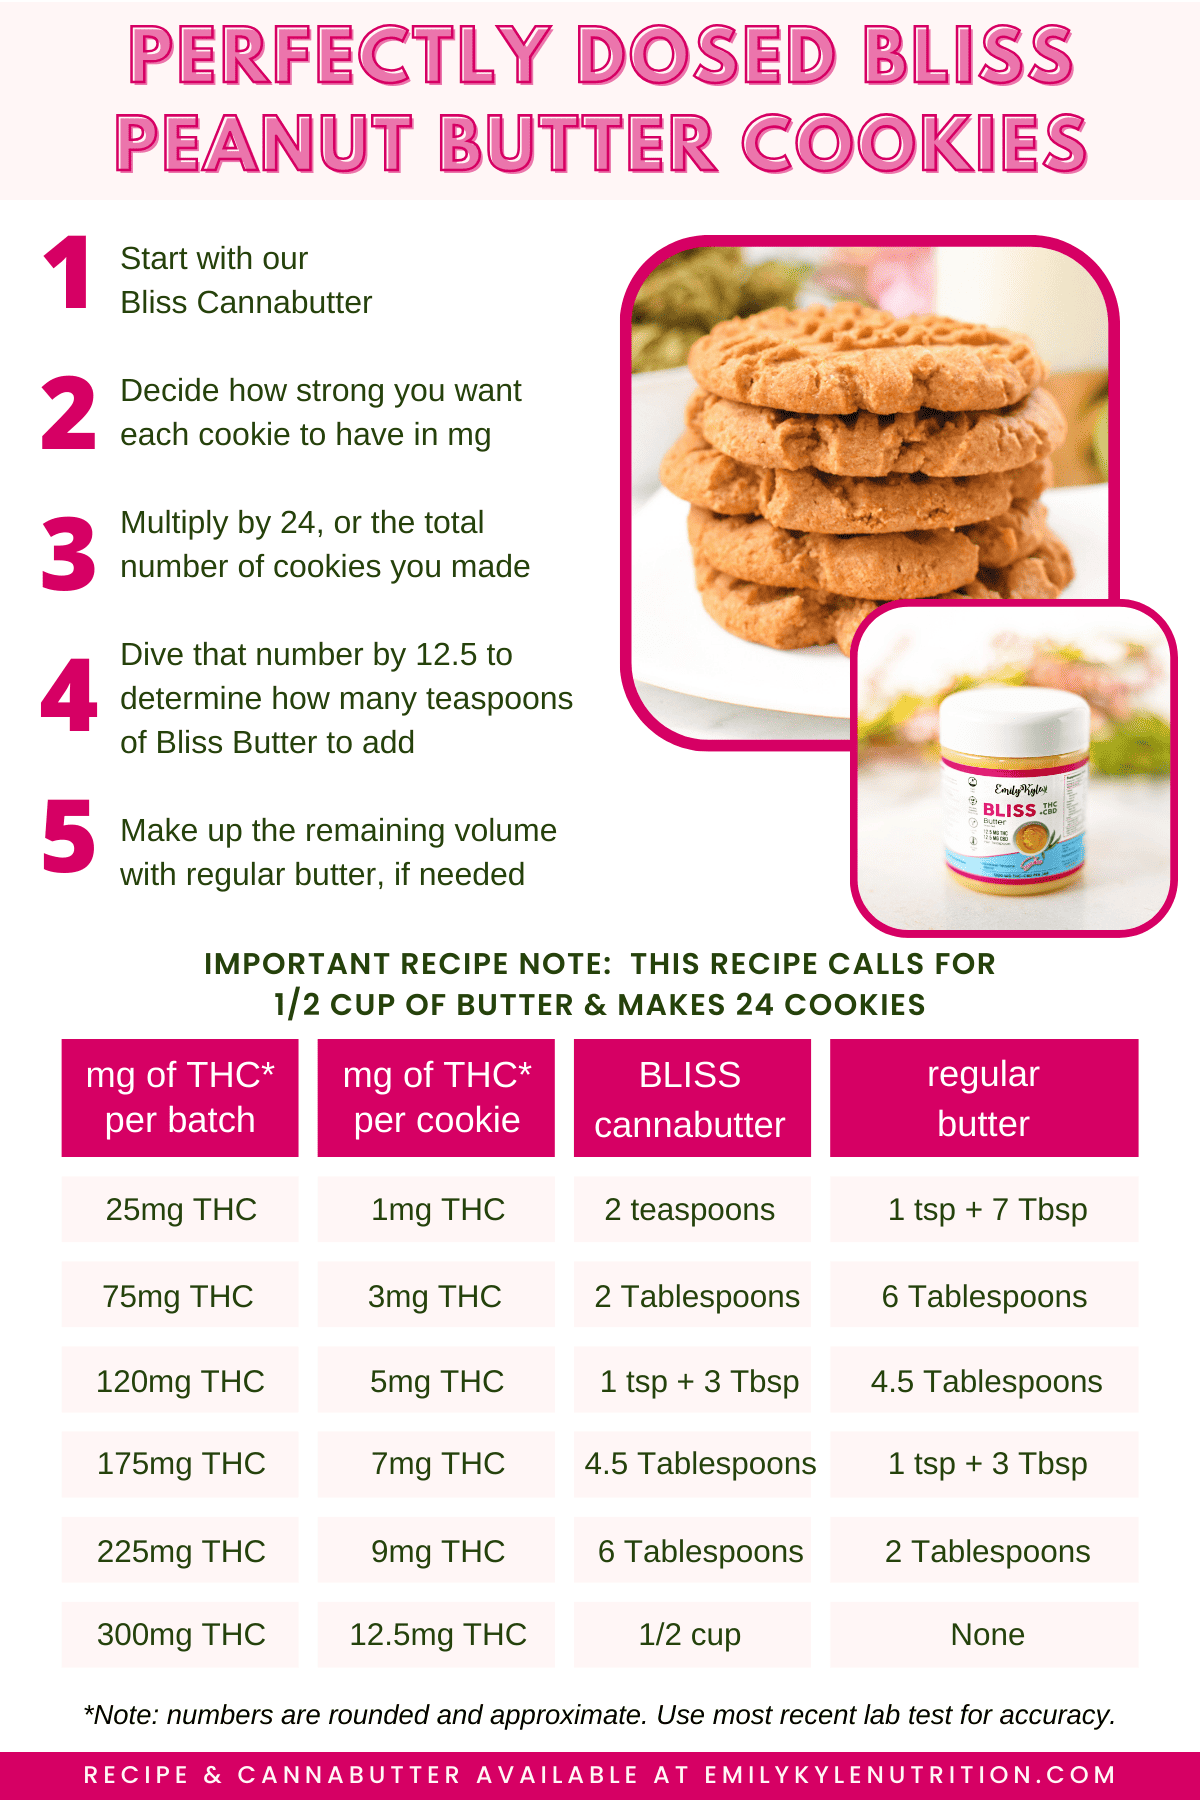 A picture of a dosage chart that shows how many mG of THC are in these peanut butter cookies.